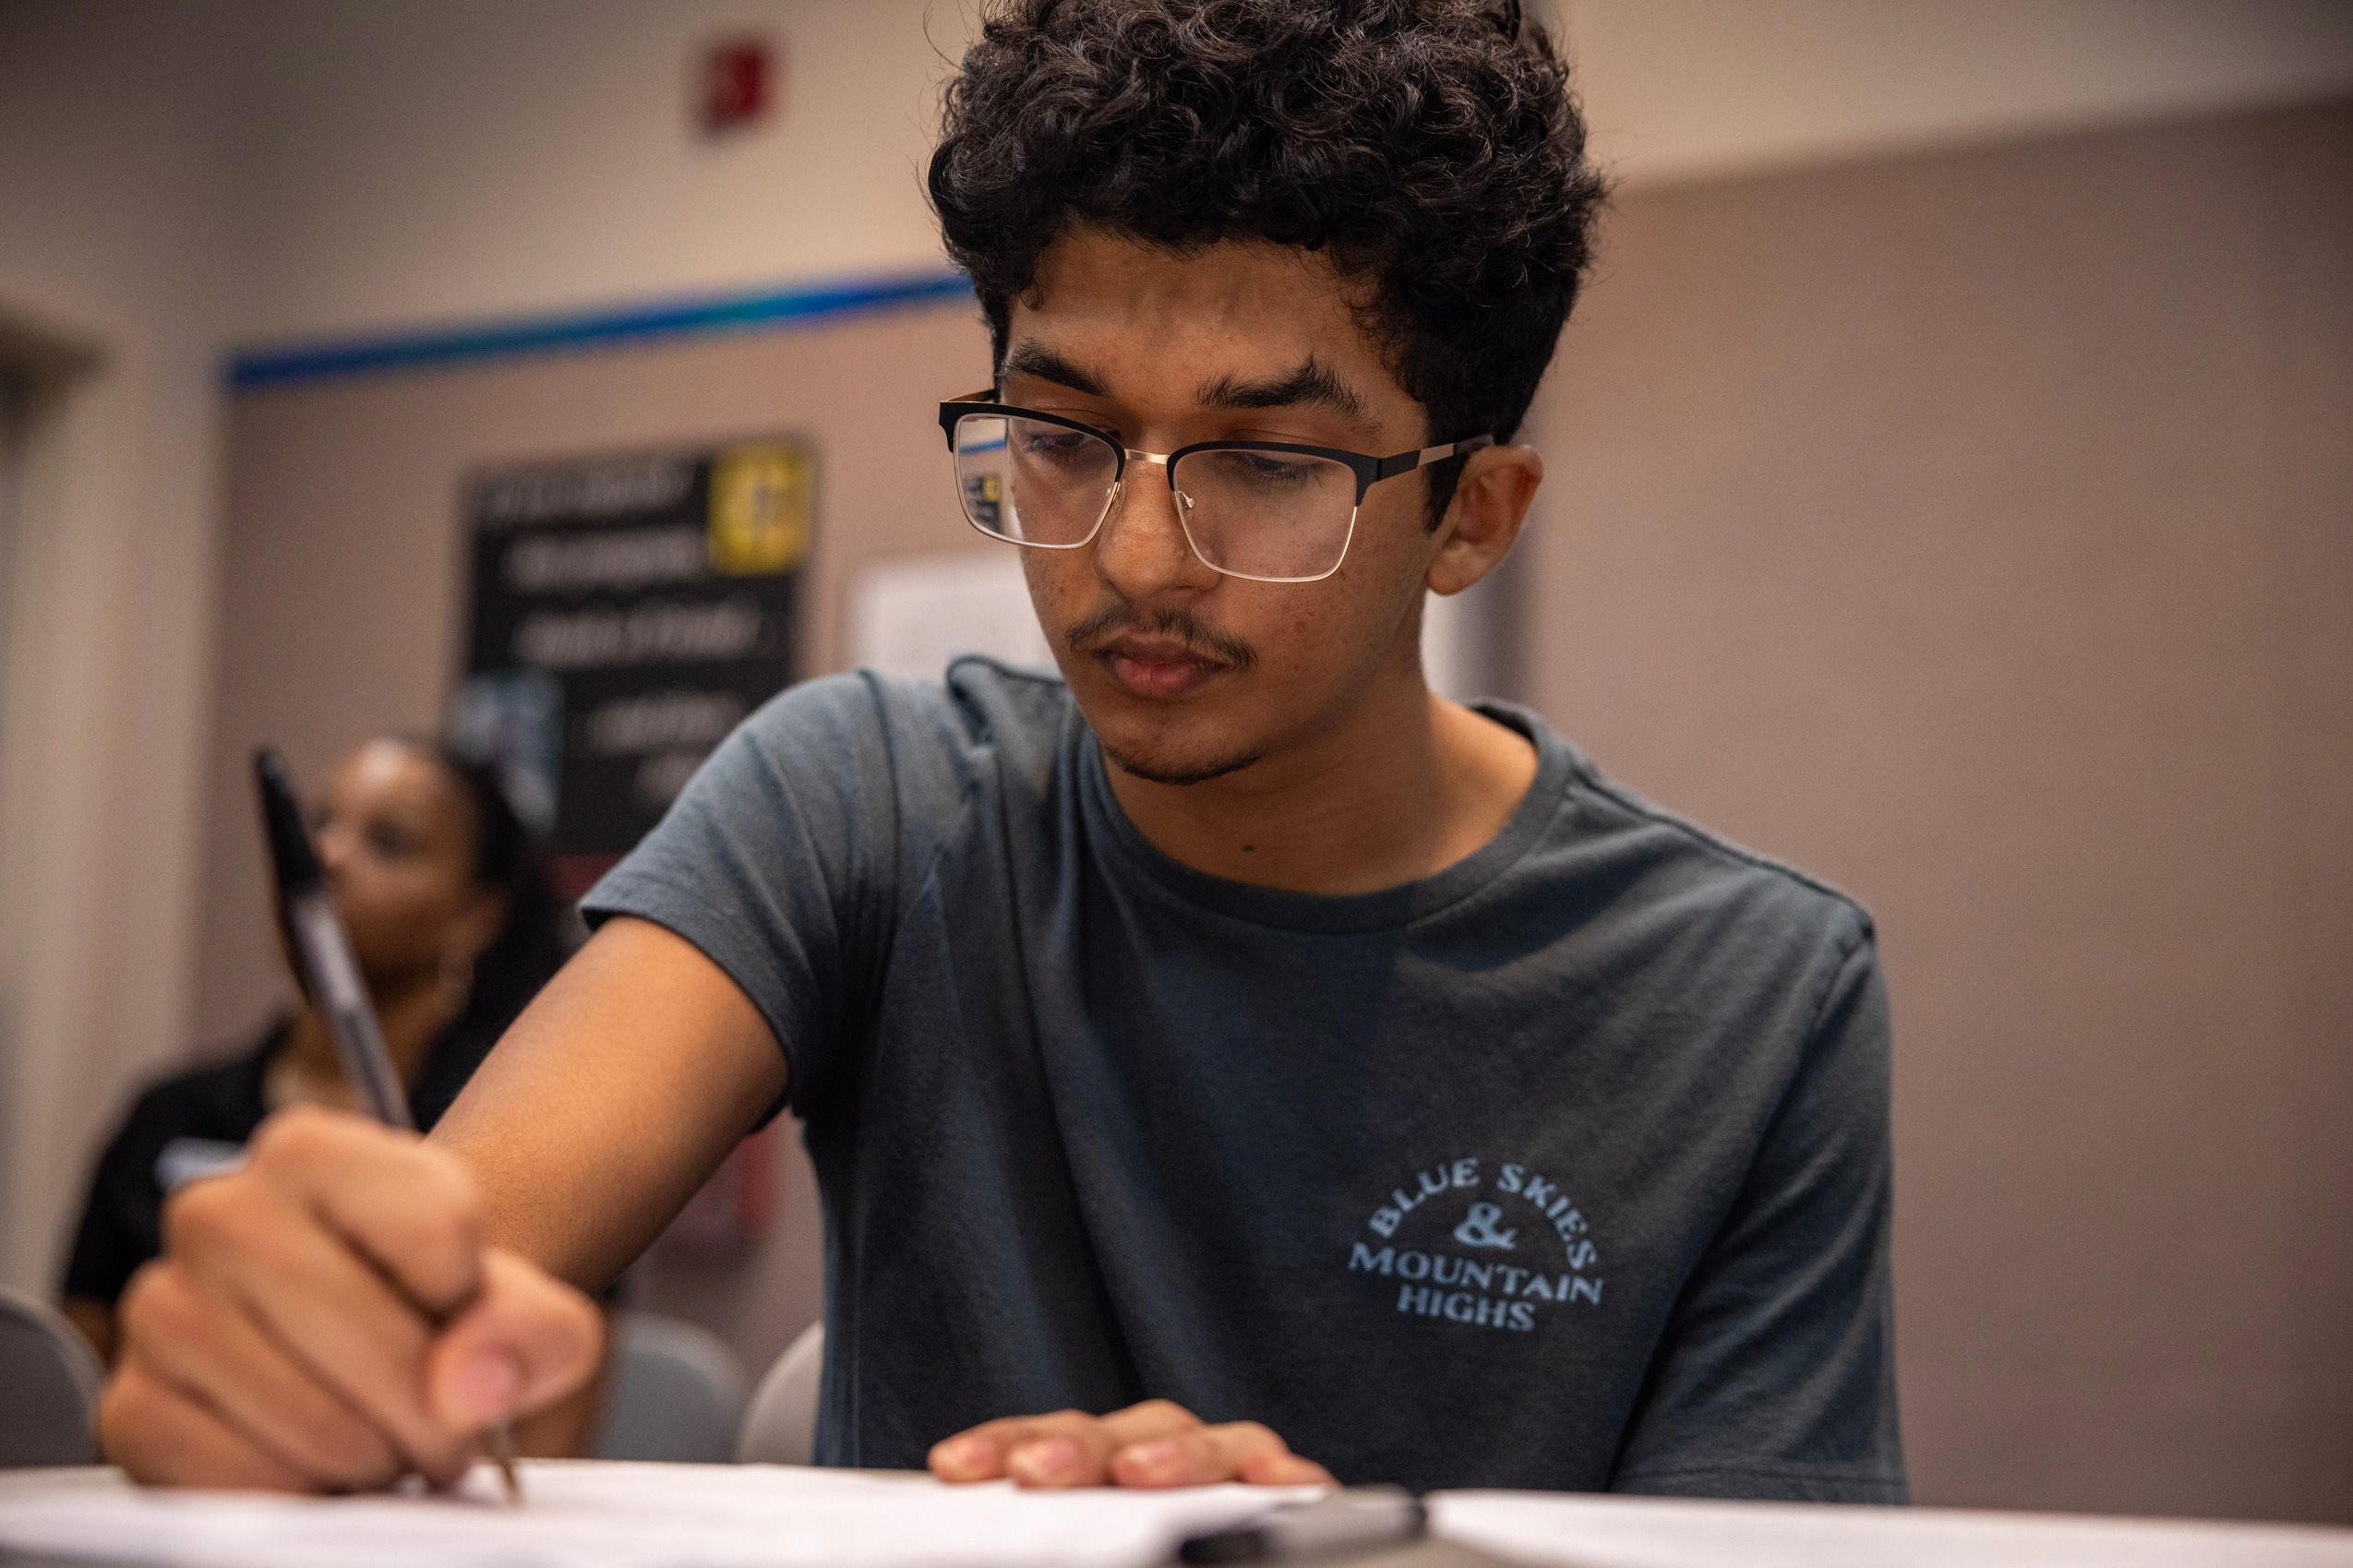 Mustafa Ali, 16, writes letters in support of a proposed EPA pollution reduction ruling